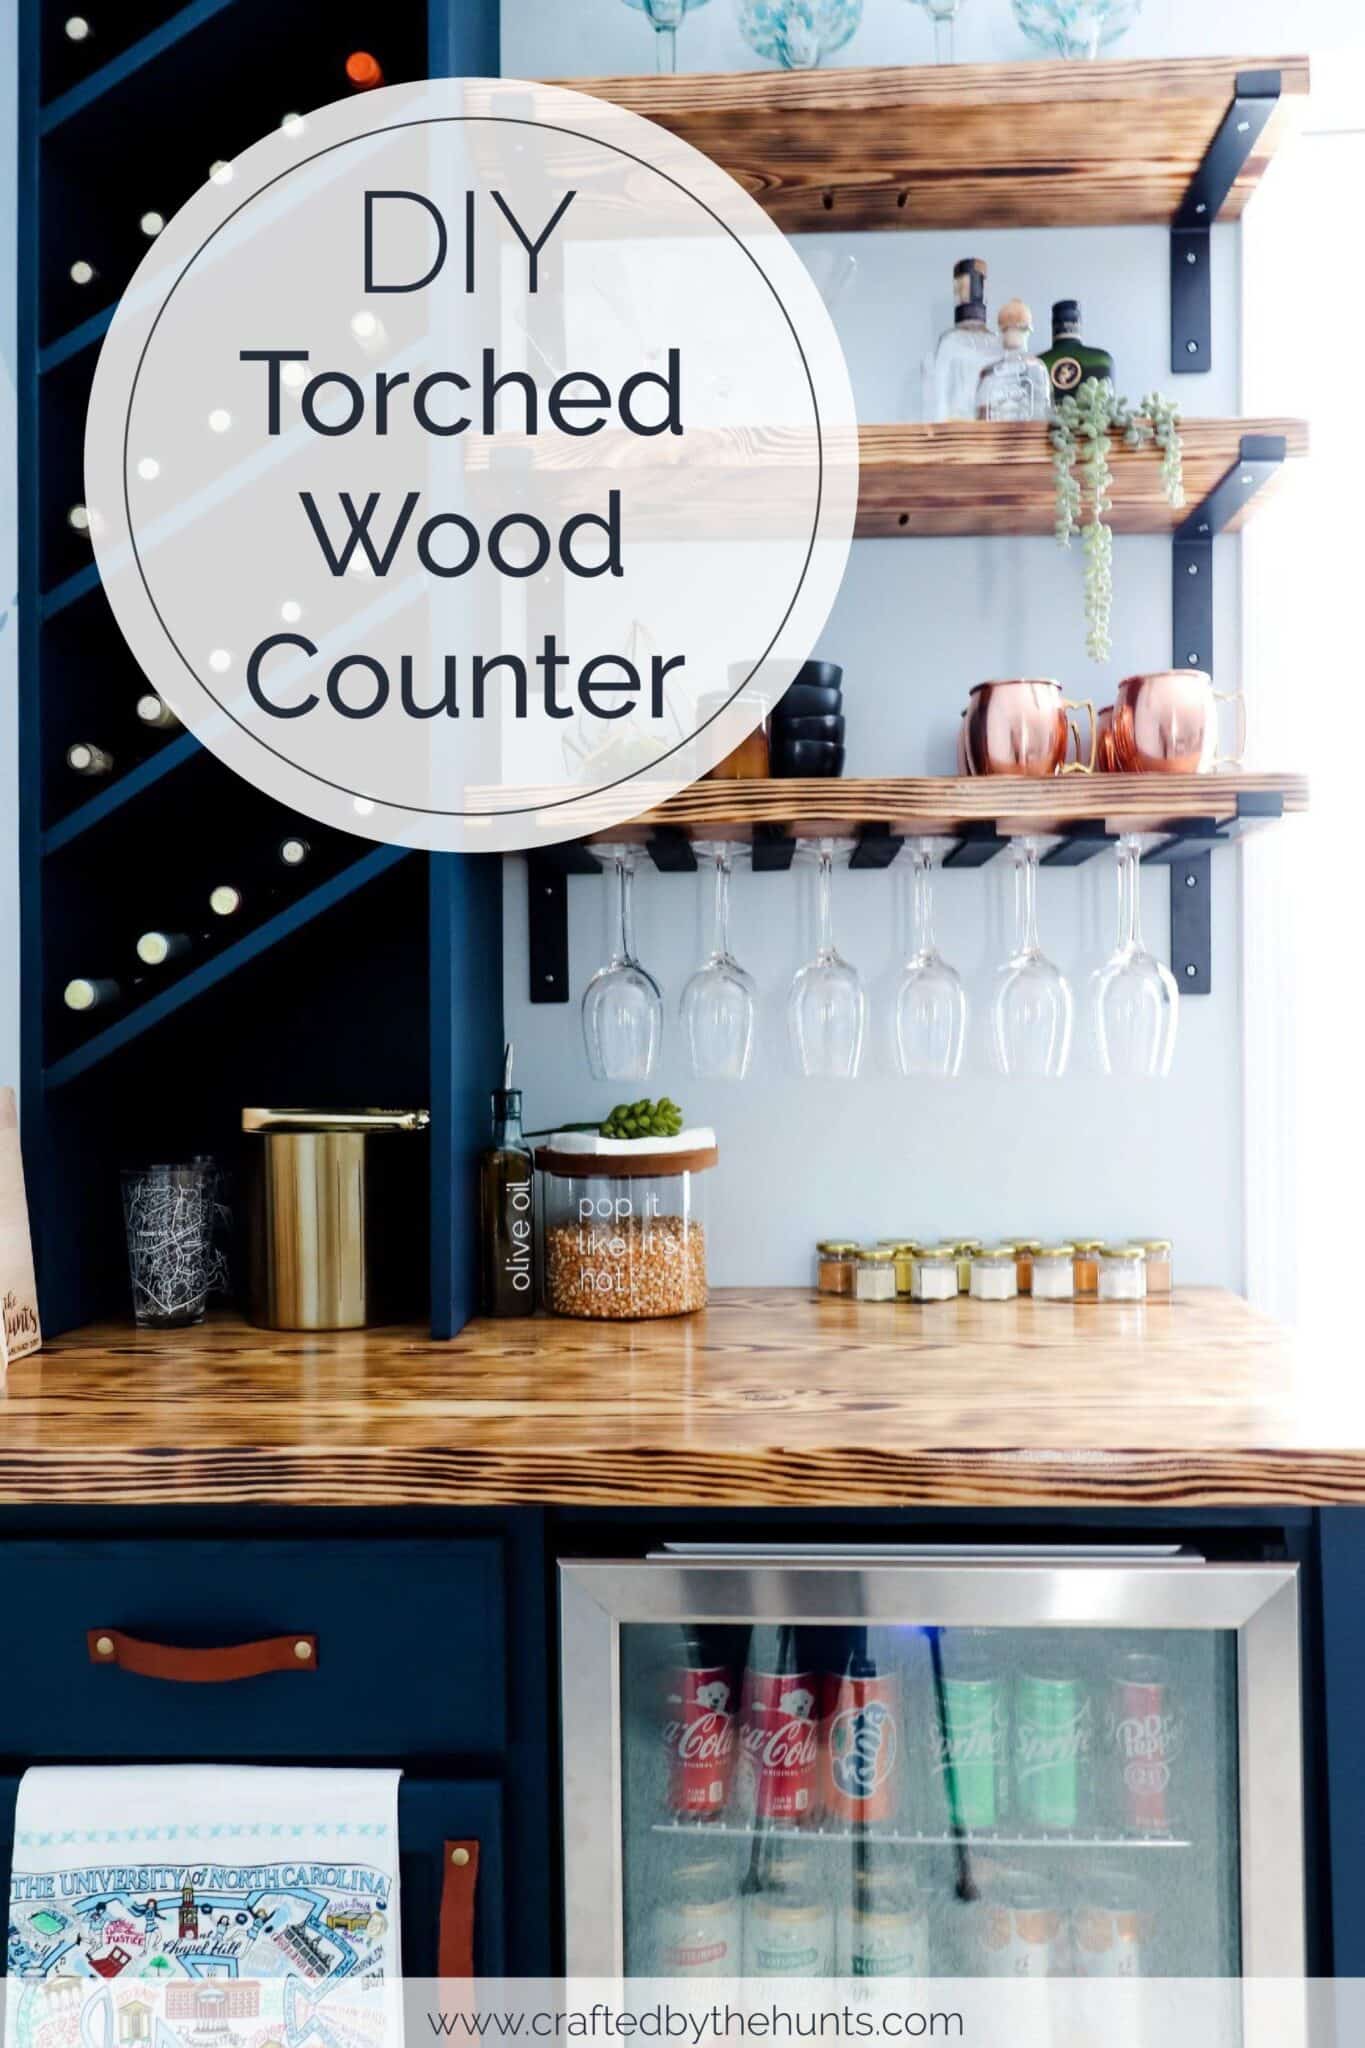 DIY torched wood countertop in a kitchen bar area